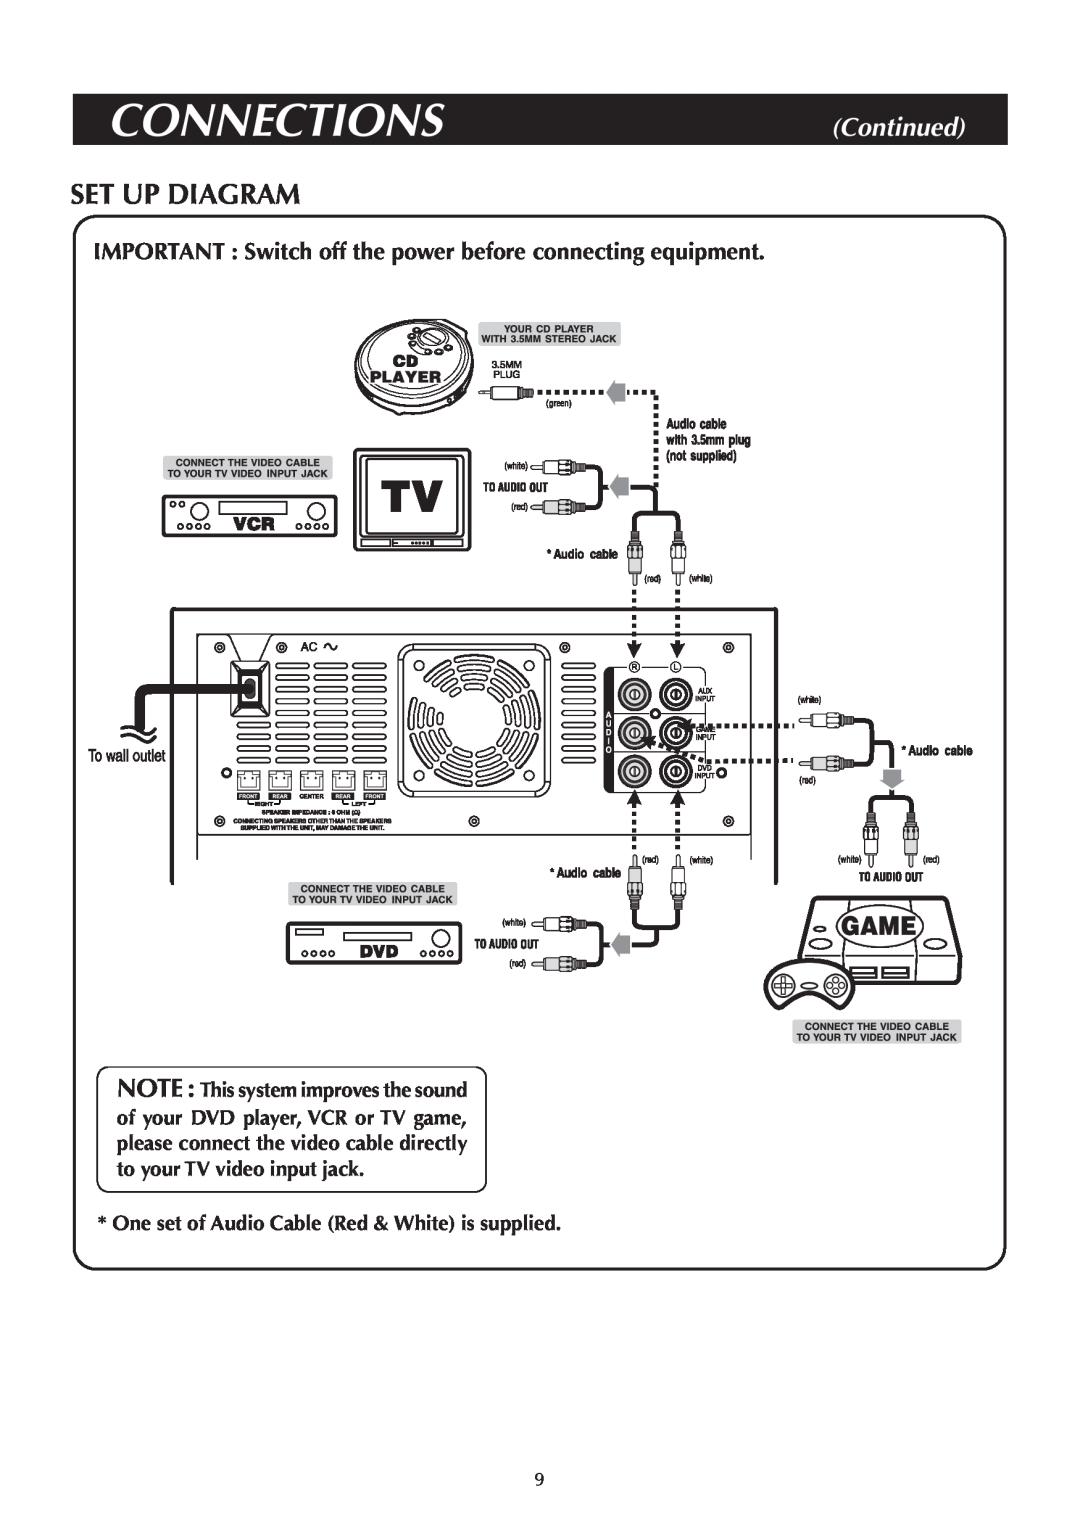 Venturer ASR150 instruction manual Set Up Diagram, One set of Audio Cable Red & White is supplied, CONNECTIONSContinued 